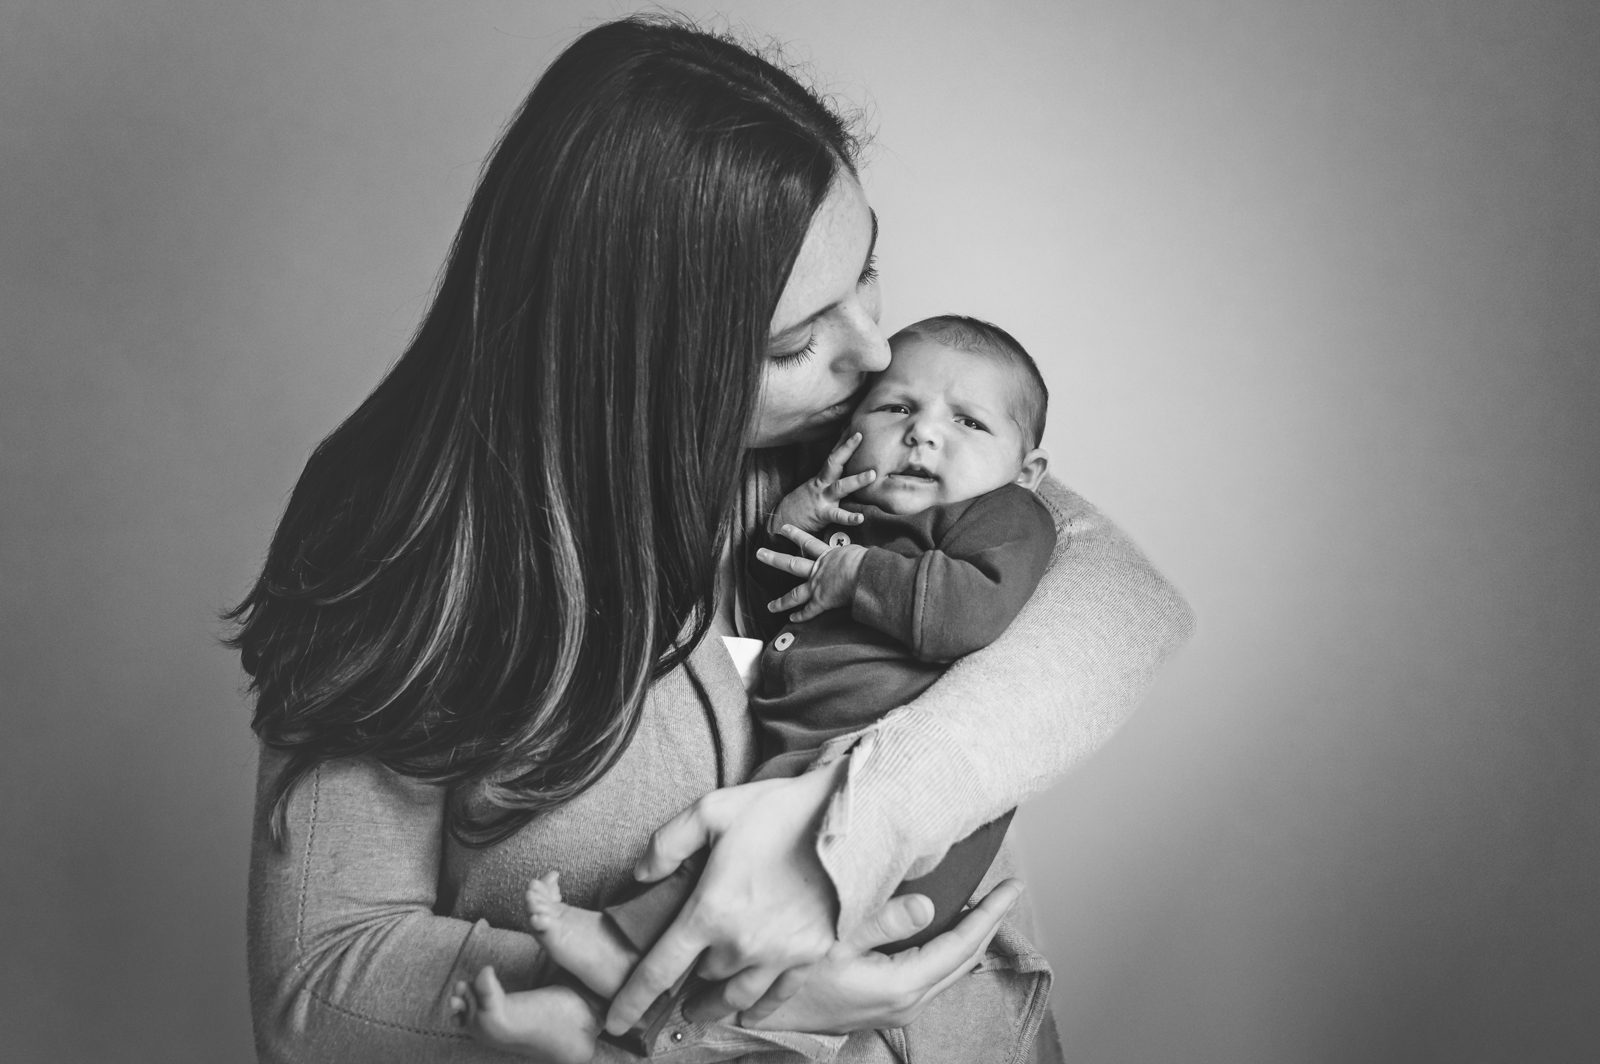 Black and white image of a mother cradling her newborn baby girl and kissing her on the temple during a natural newborn photoshoot